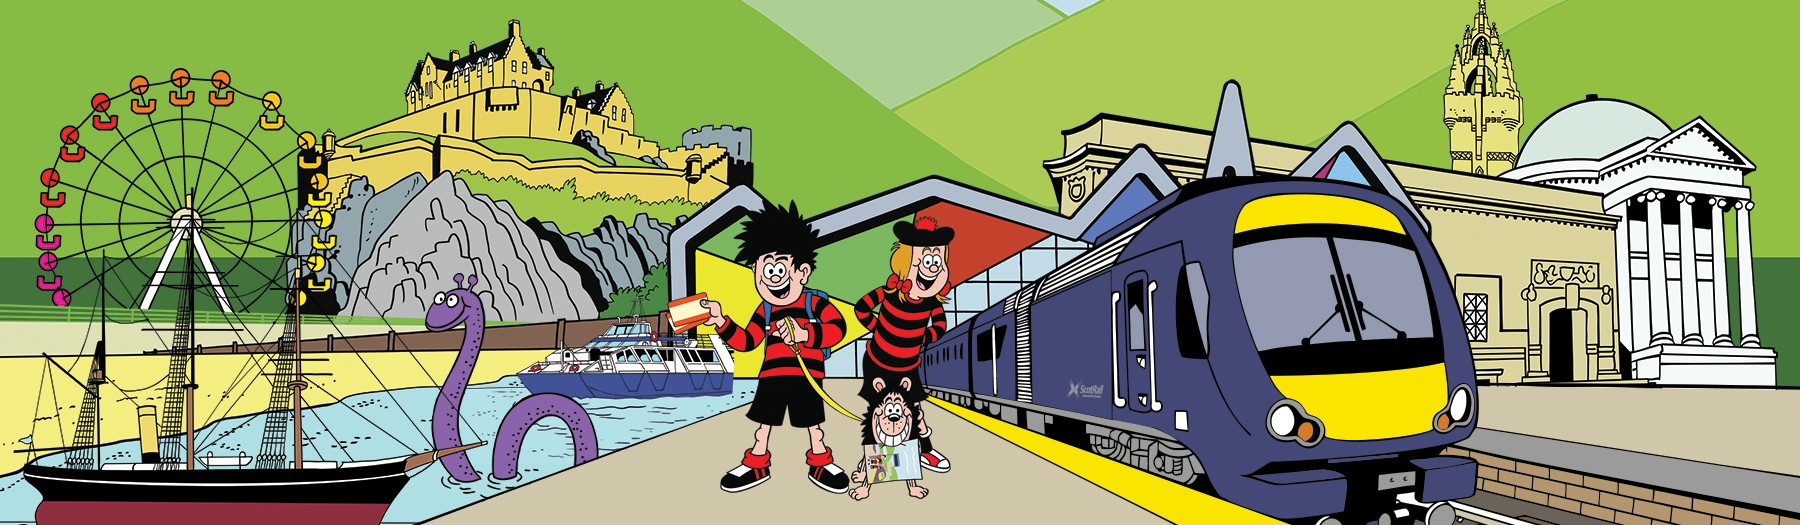 Beano and Gnasher illustration with ScotRail train and Scottish landmarks